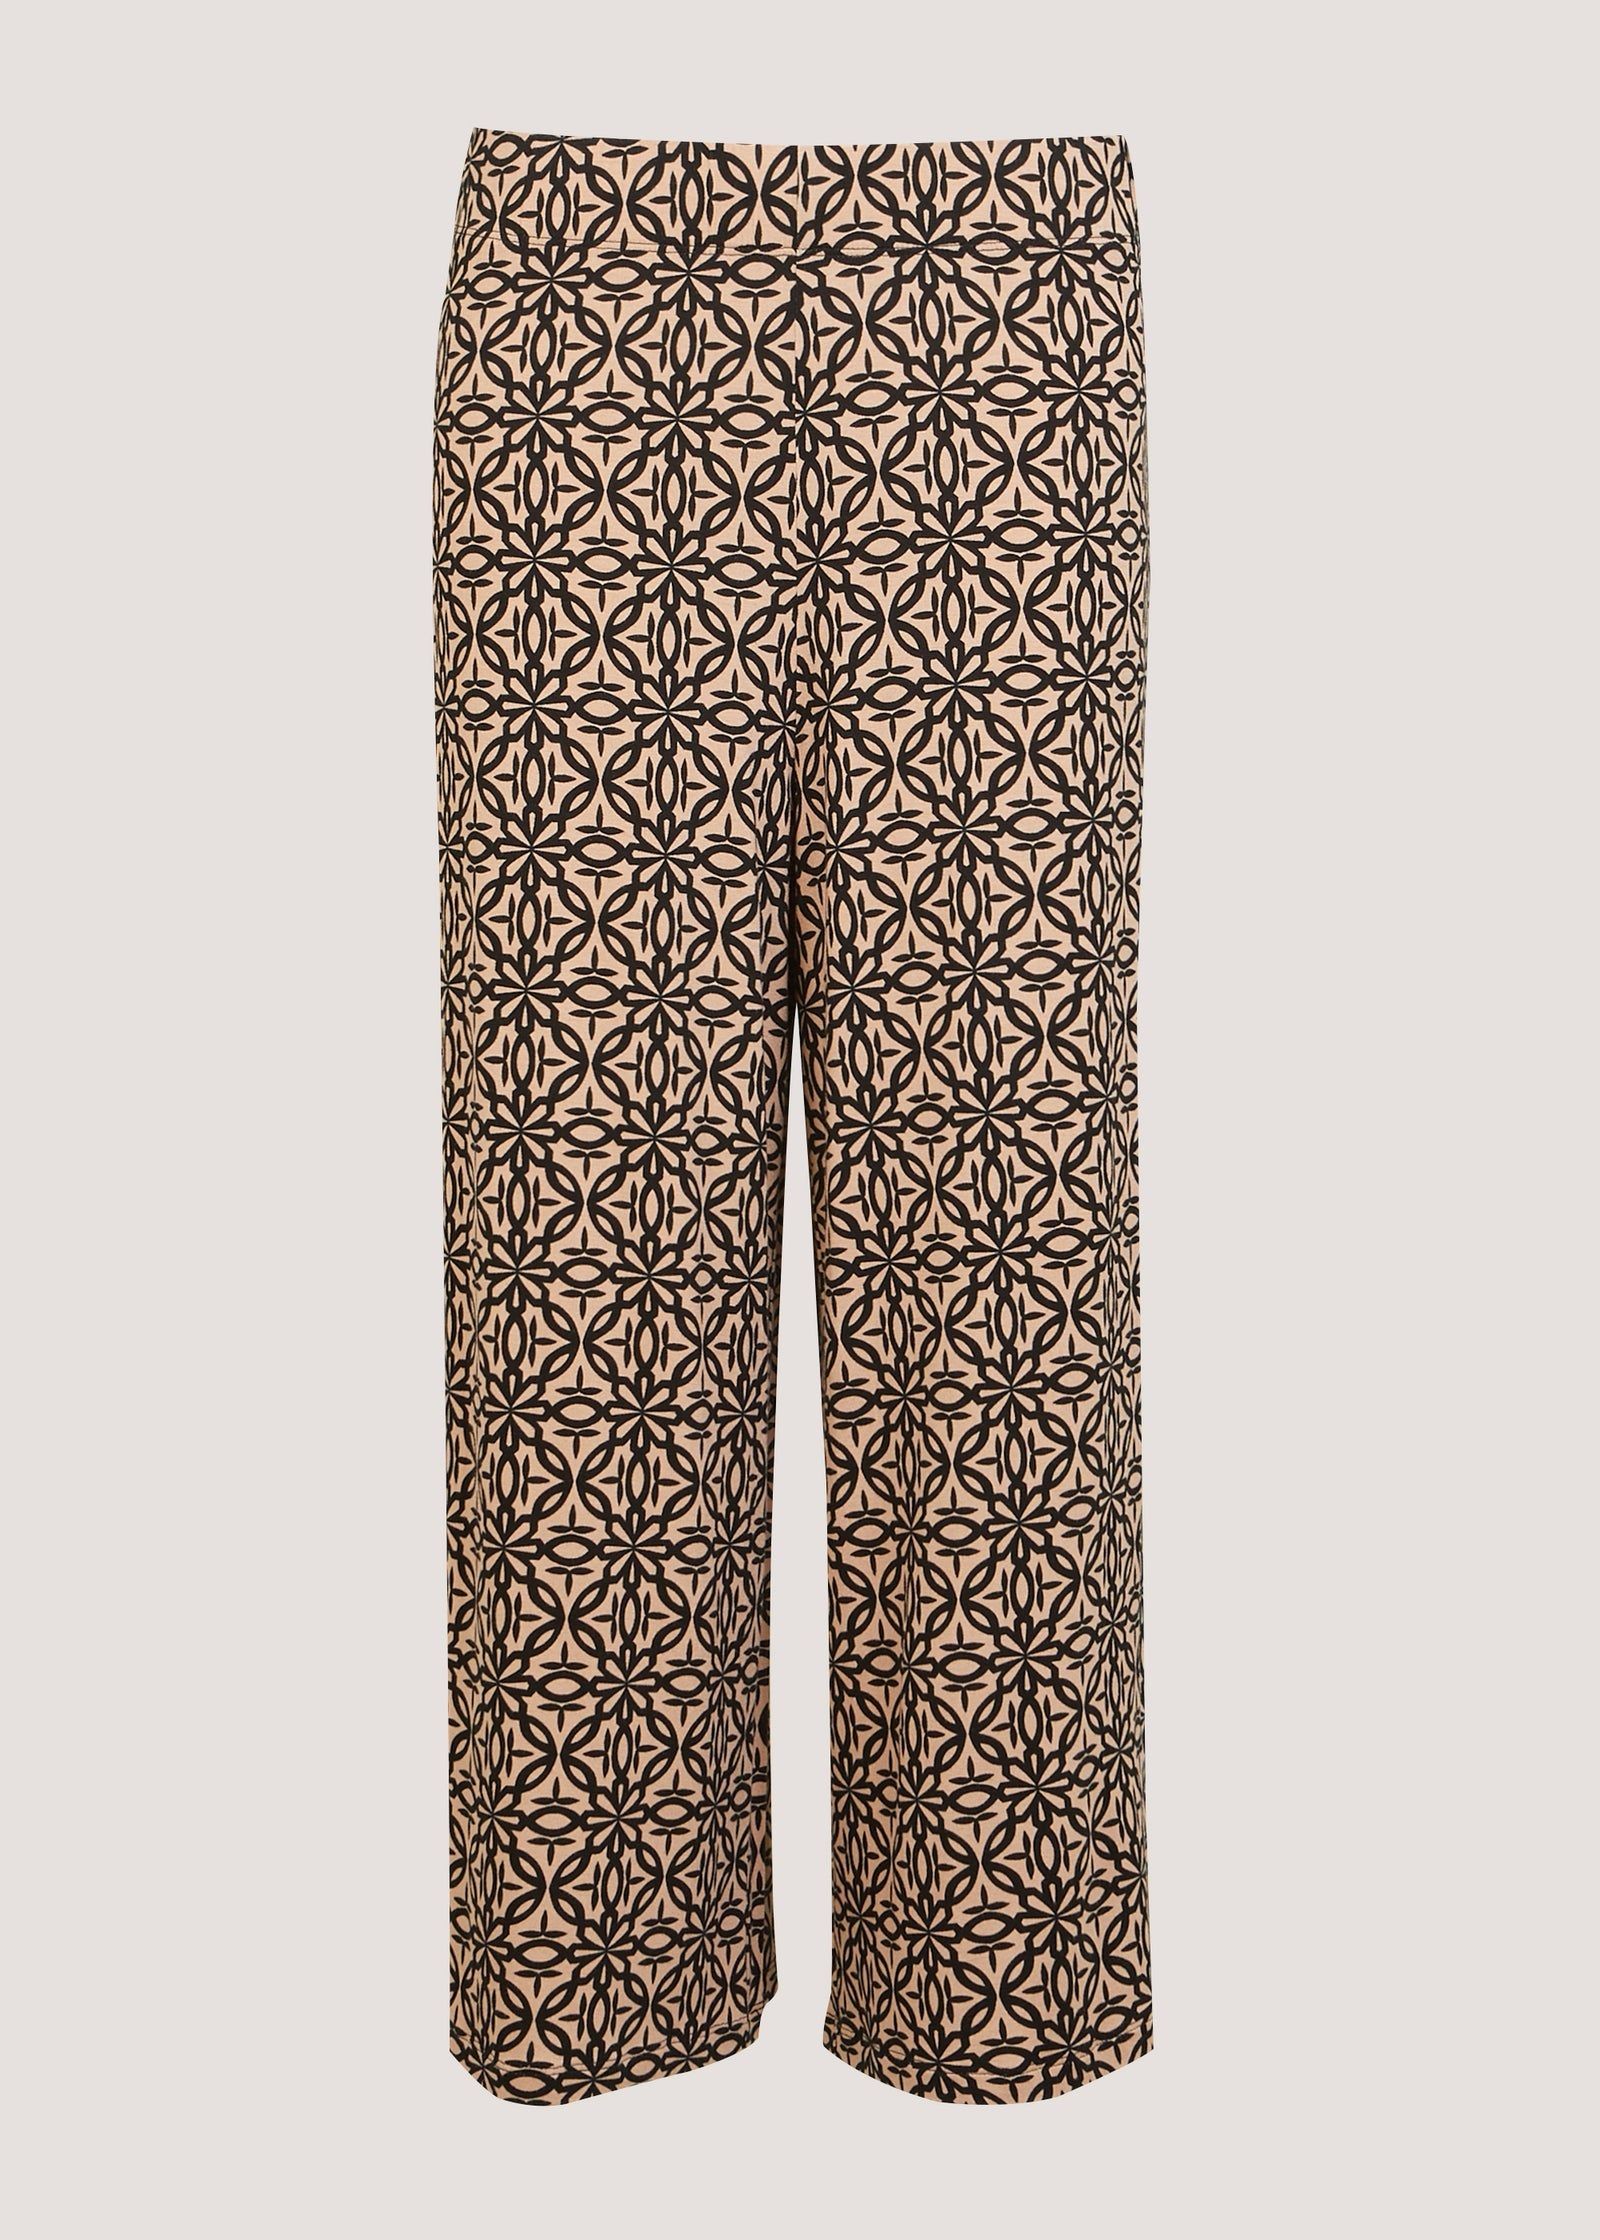 Buy Matalan Women's Trousers & Pants at Lowest Price in UAE